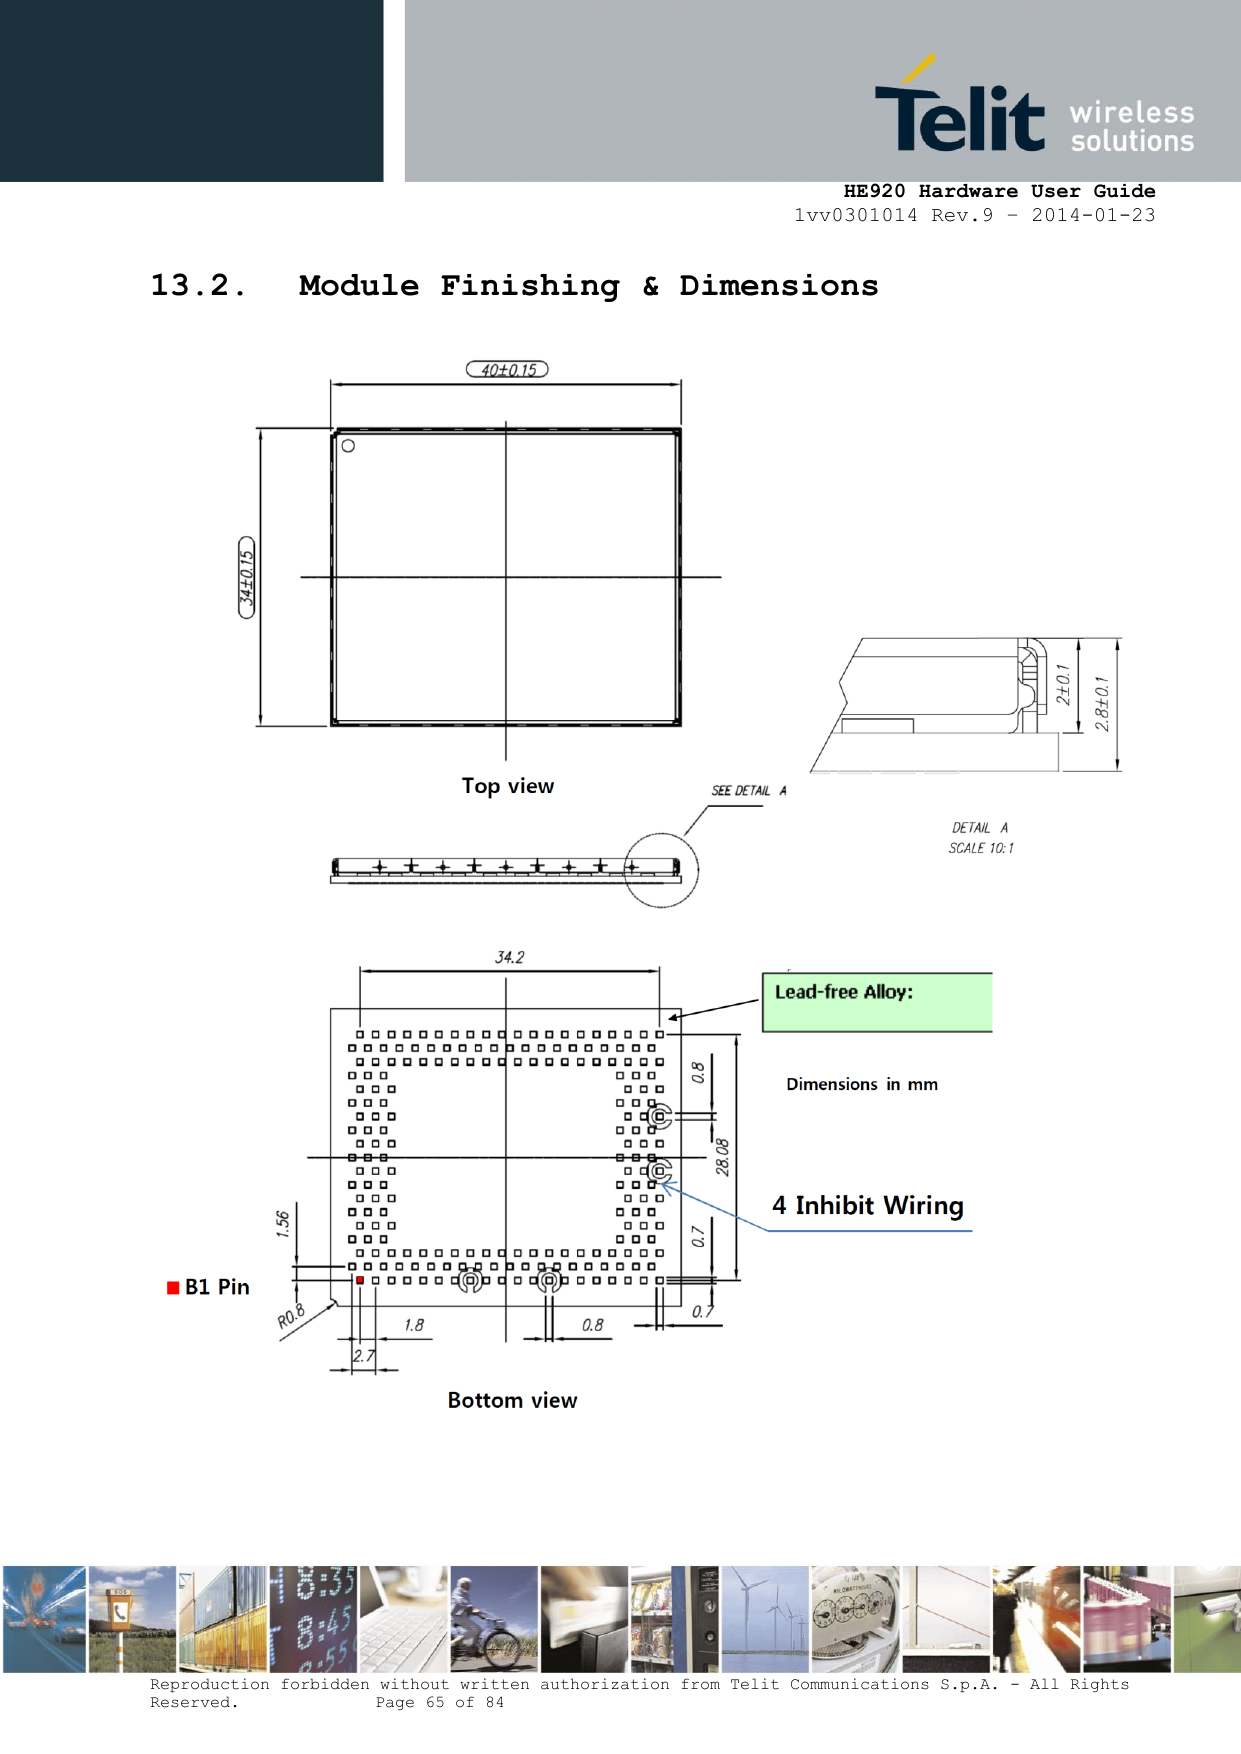     HE920 Hardware User Guide 1vv0301014 Rev.9 – 2014-01-23 Reproduction forbidden without written authorization from Telit Communications S.p.A. - All Rights Reserved.    Page 65 of 84  13.2. Module Finishing &amp; Dimensions     